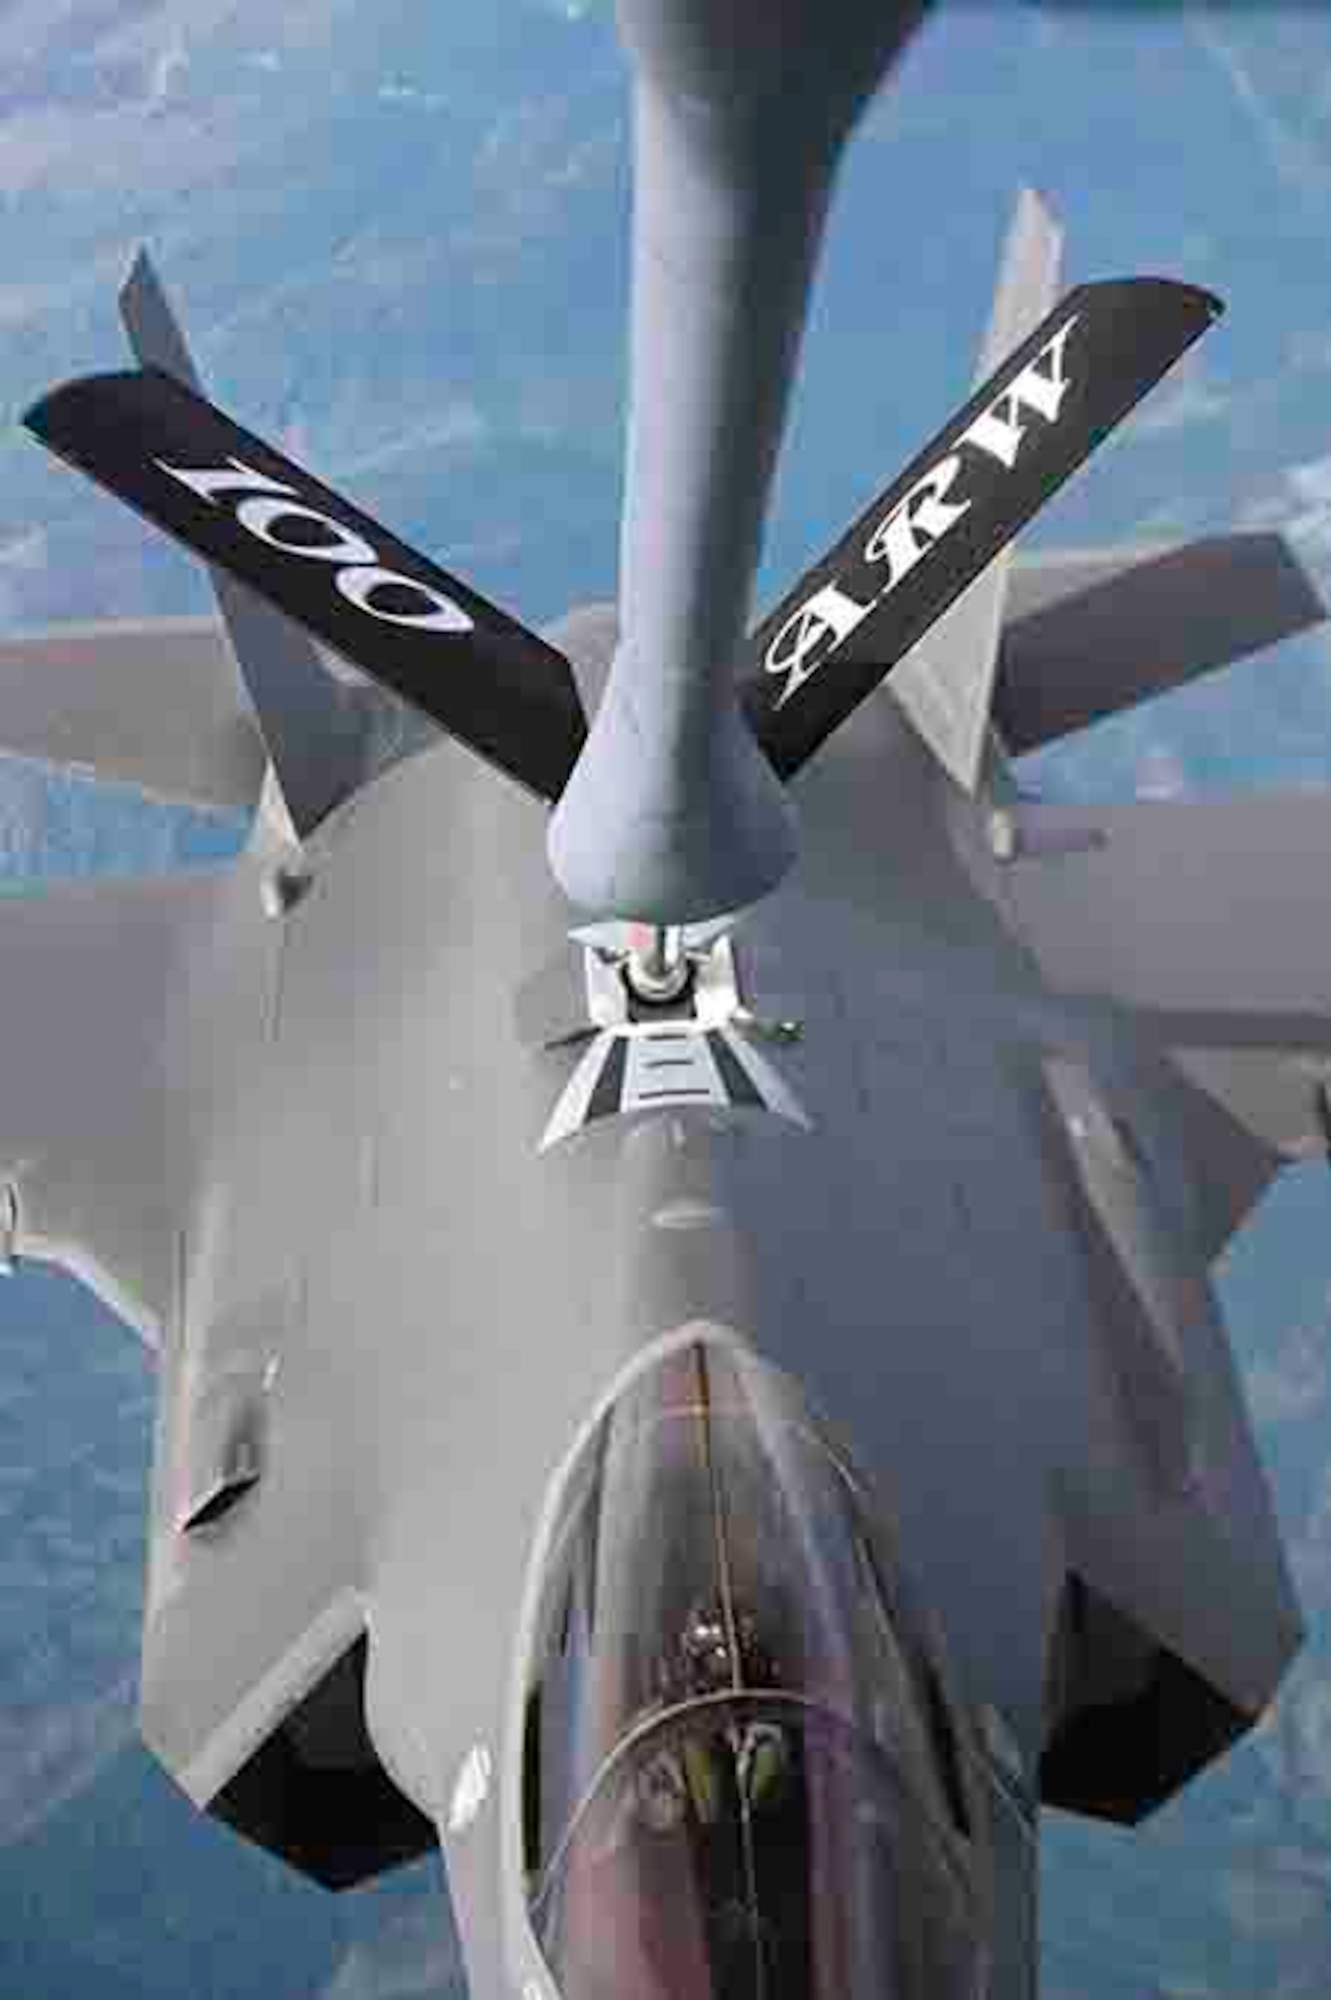 A U.S. Air Force F-35A Lightning II aircraft assigned to the 4th Fighter Squadron, Hill Air Force Base, Utah, receives fuel from a KC-135 Stratotanker aircraft assigned to the 100th Air Refueling Wing, Royal Air Force Mildenhall, England, over France during exercise Atlantic Trident, May 26, 2021. Participation in multinational exercises like Atlantic Trident 21 enhance our professional relationships and improves overall coordination with allies and partner militaries during times of crisis. (U.S. Air Force photo by Senior Airman Joseph Barron)